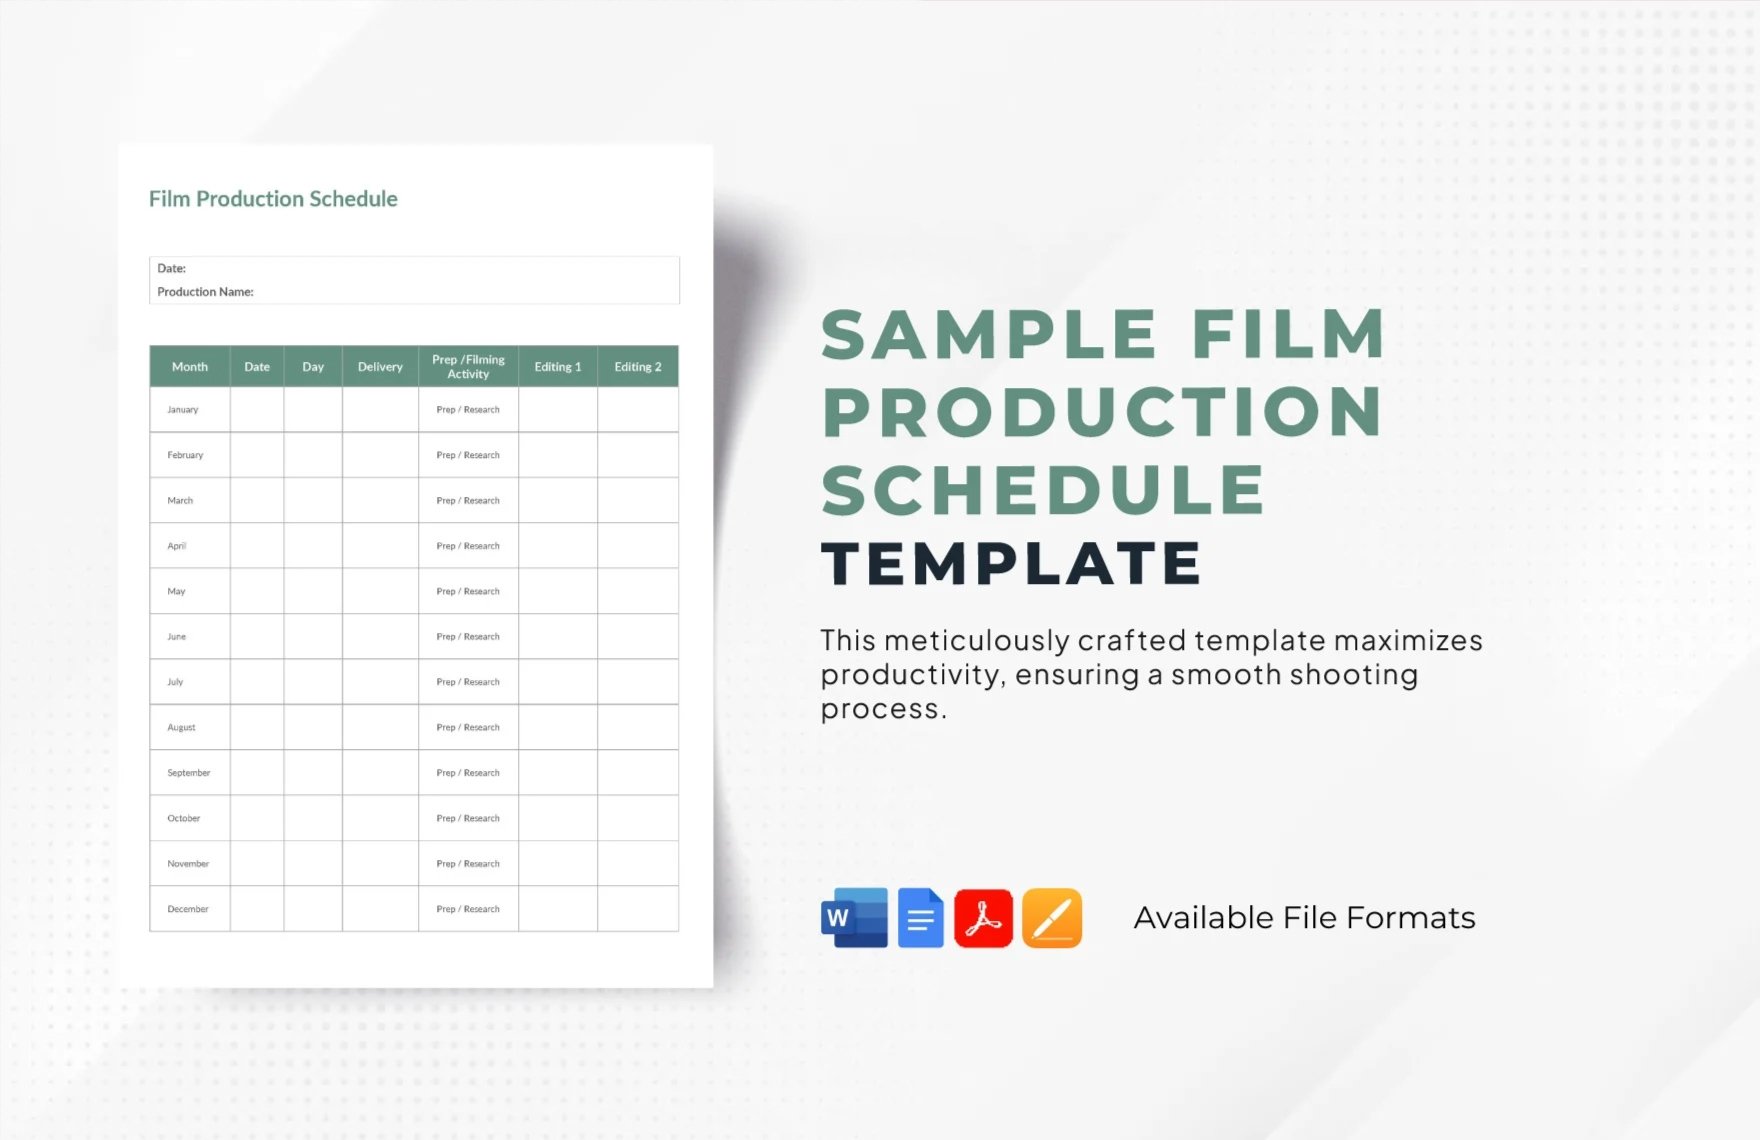 Free Sample Film Production Schedule Template in Word, Google Docs, PDF, Apple Pages